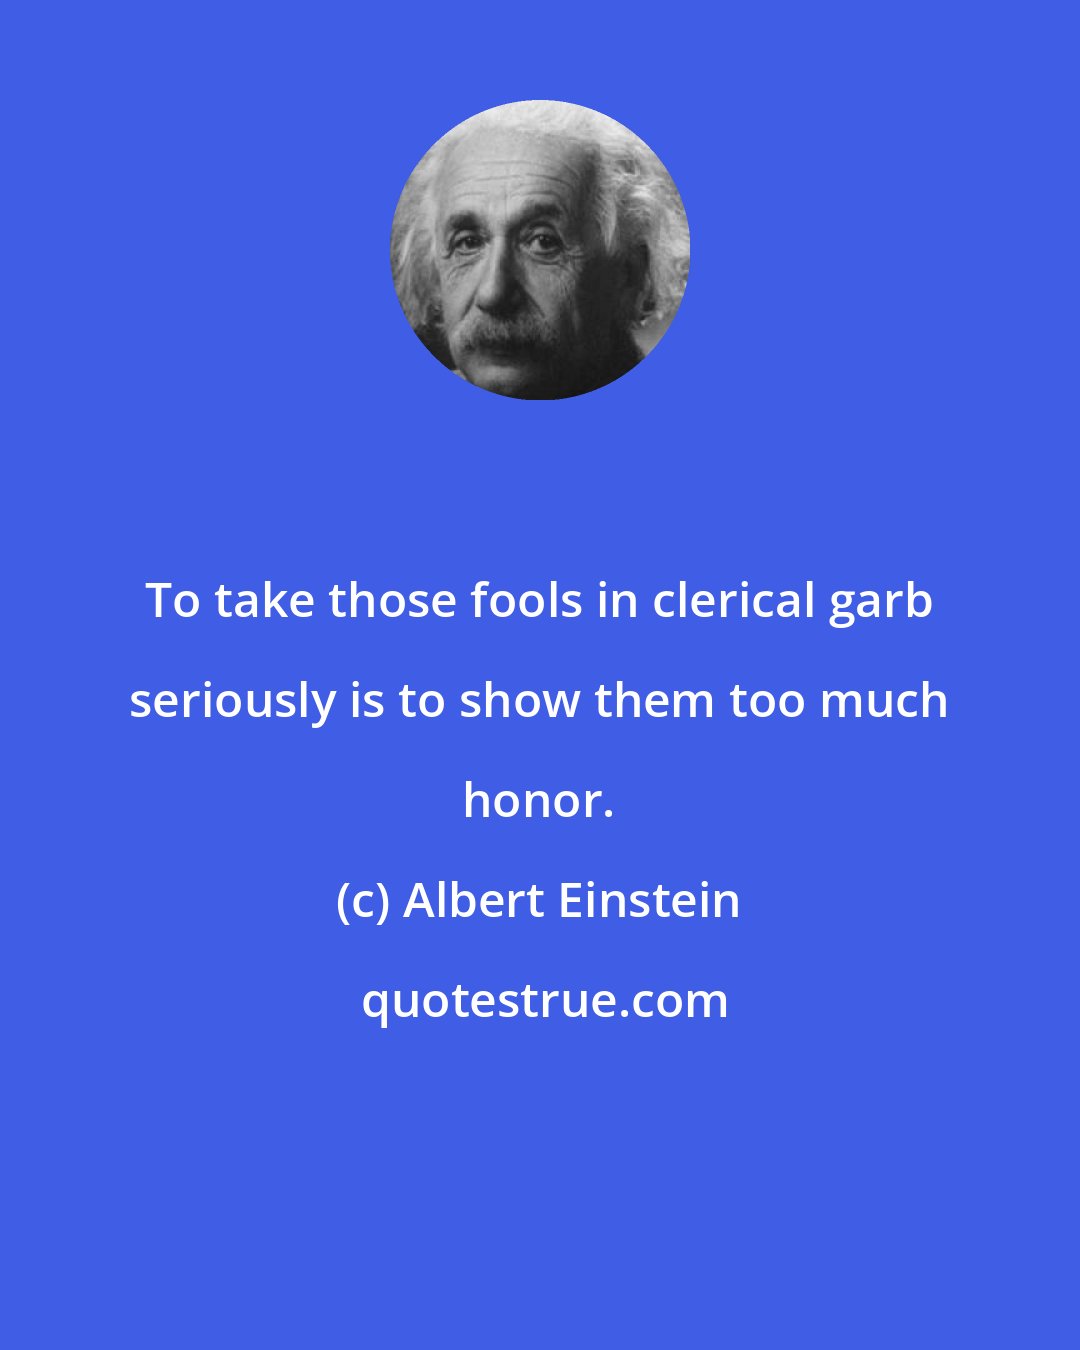 Albert Einstein: To take those fools in clerical garb seriously is to show them too much honor.